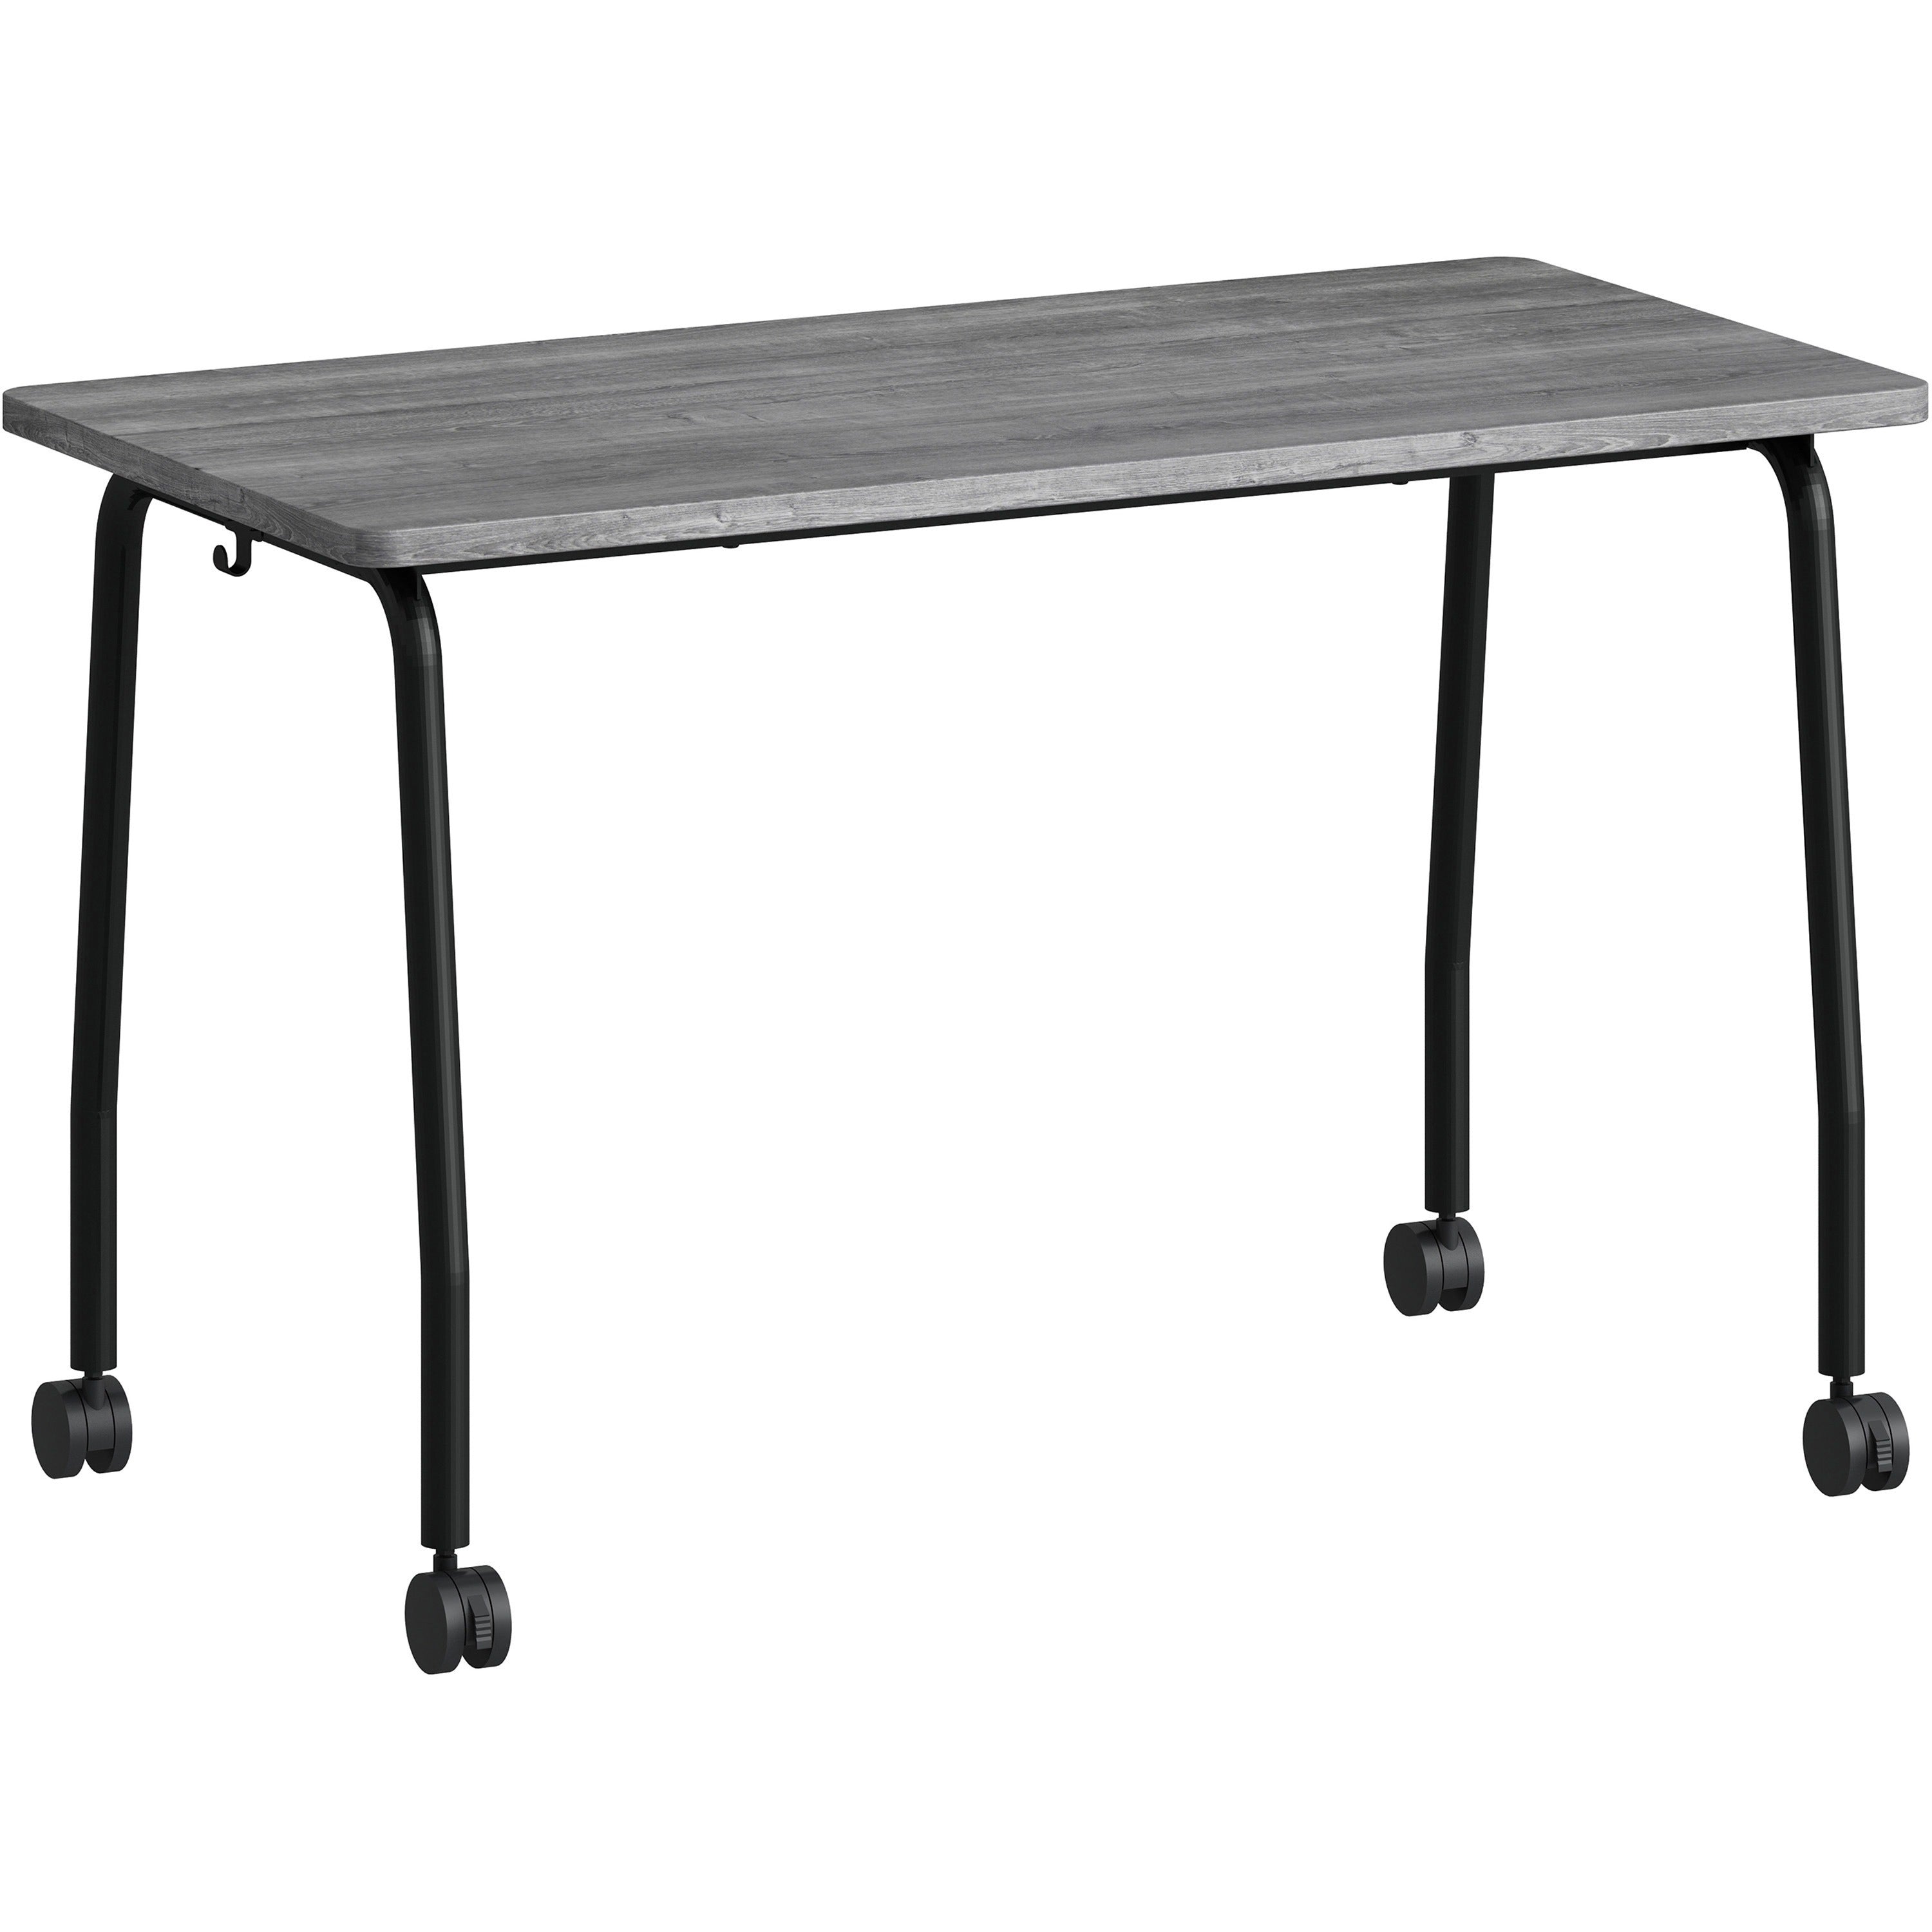 Lorell Training Table - For - Table TopLaminated Top - 300 lb Capacity - 29.50" Table Top Length x 23.63" Table Top Width x 1" Table Top Thickness - 47.25" Height - Assembly Required - Weathered Charcoal - Particleboard Top Material - 1 Each - 1